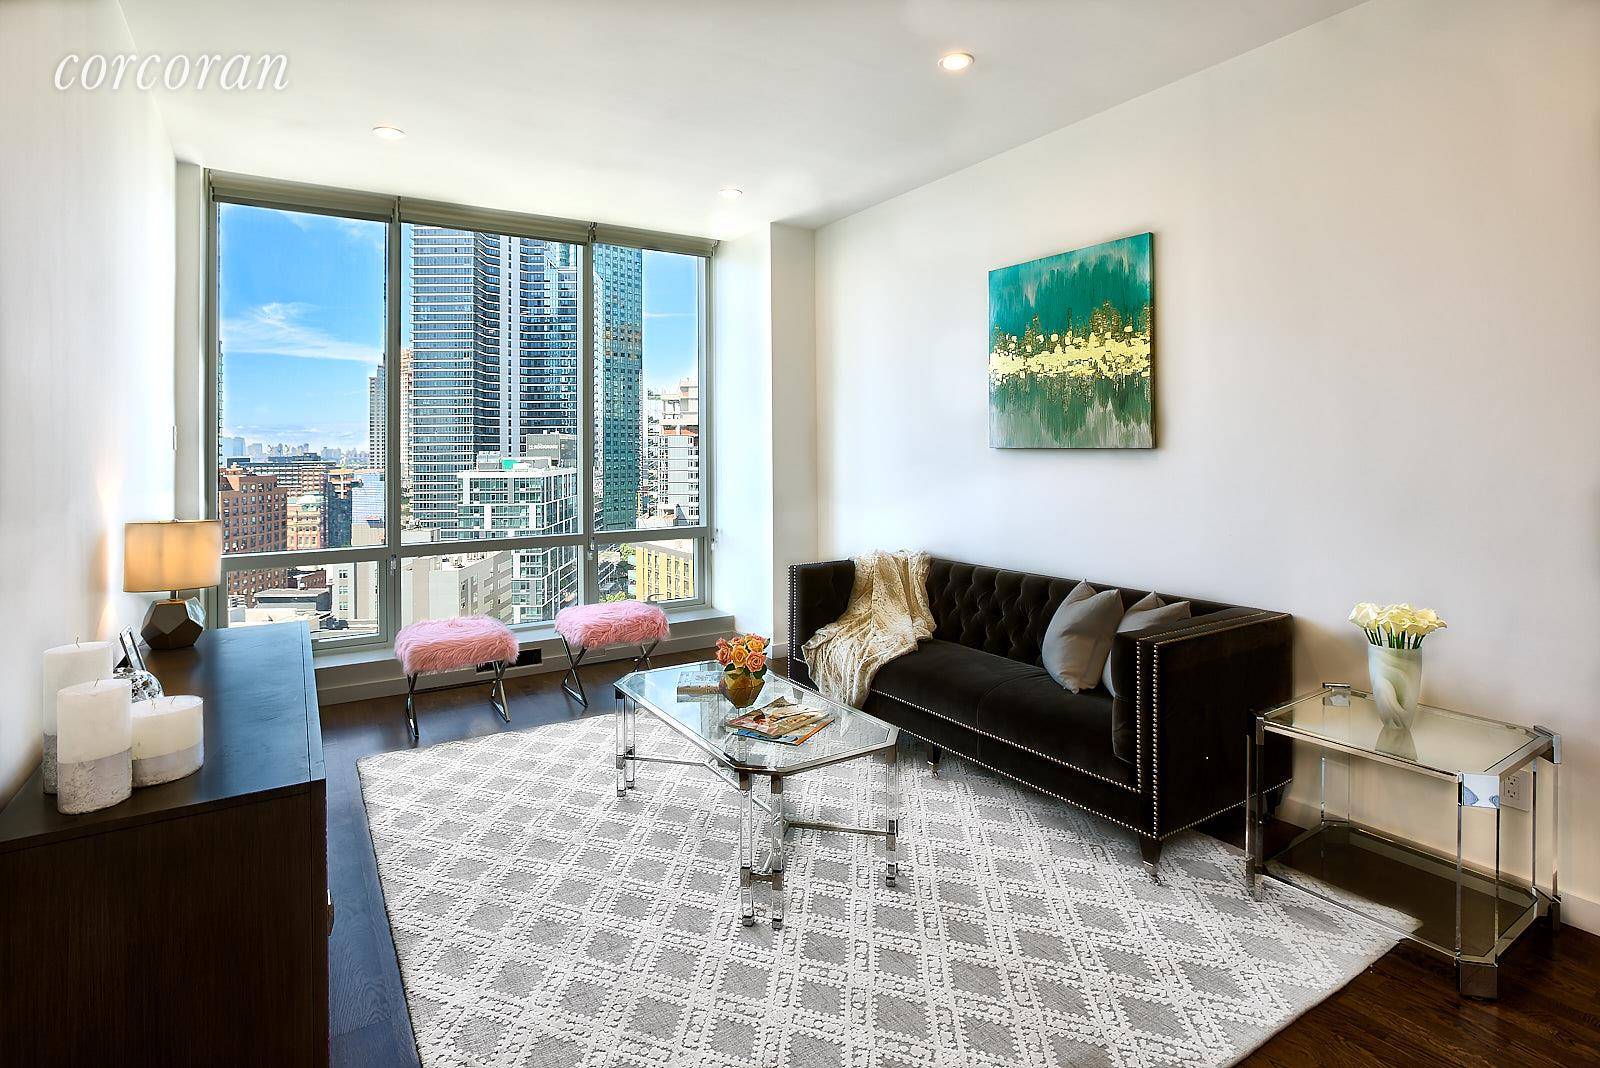 SPACIOUS 1 BED 1 BATH WITH A 15 YEAR TAX ABATEMENT Set in the heart of vibrant Long Island City, Star Tower combines sleek modern design, thoughtful space, and graceful ...